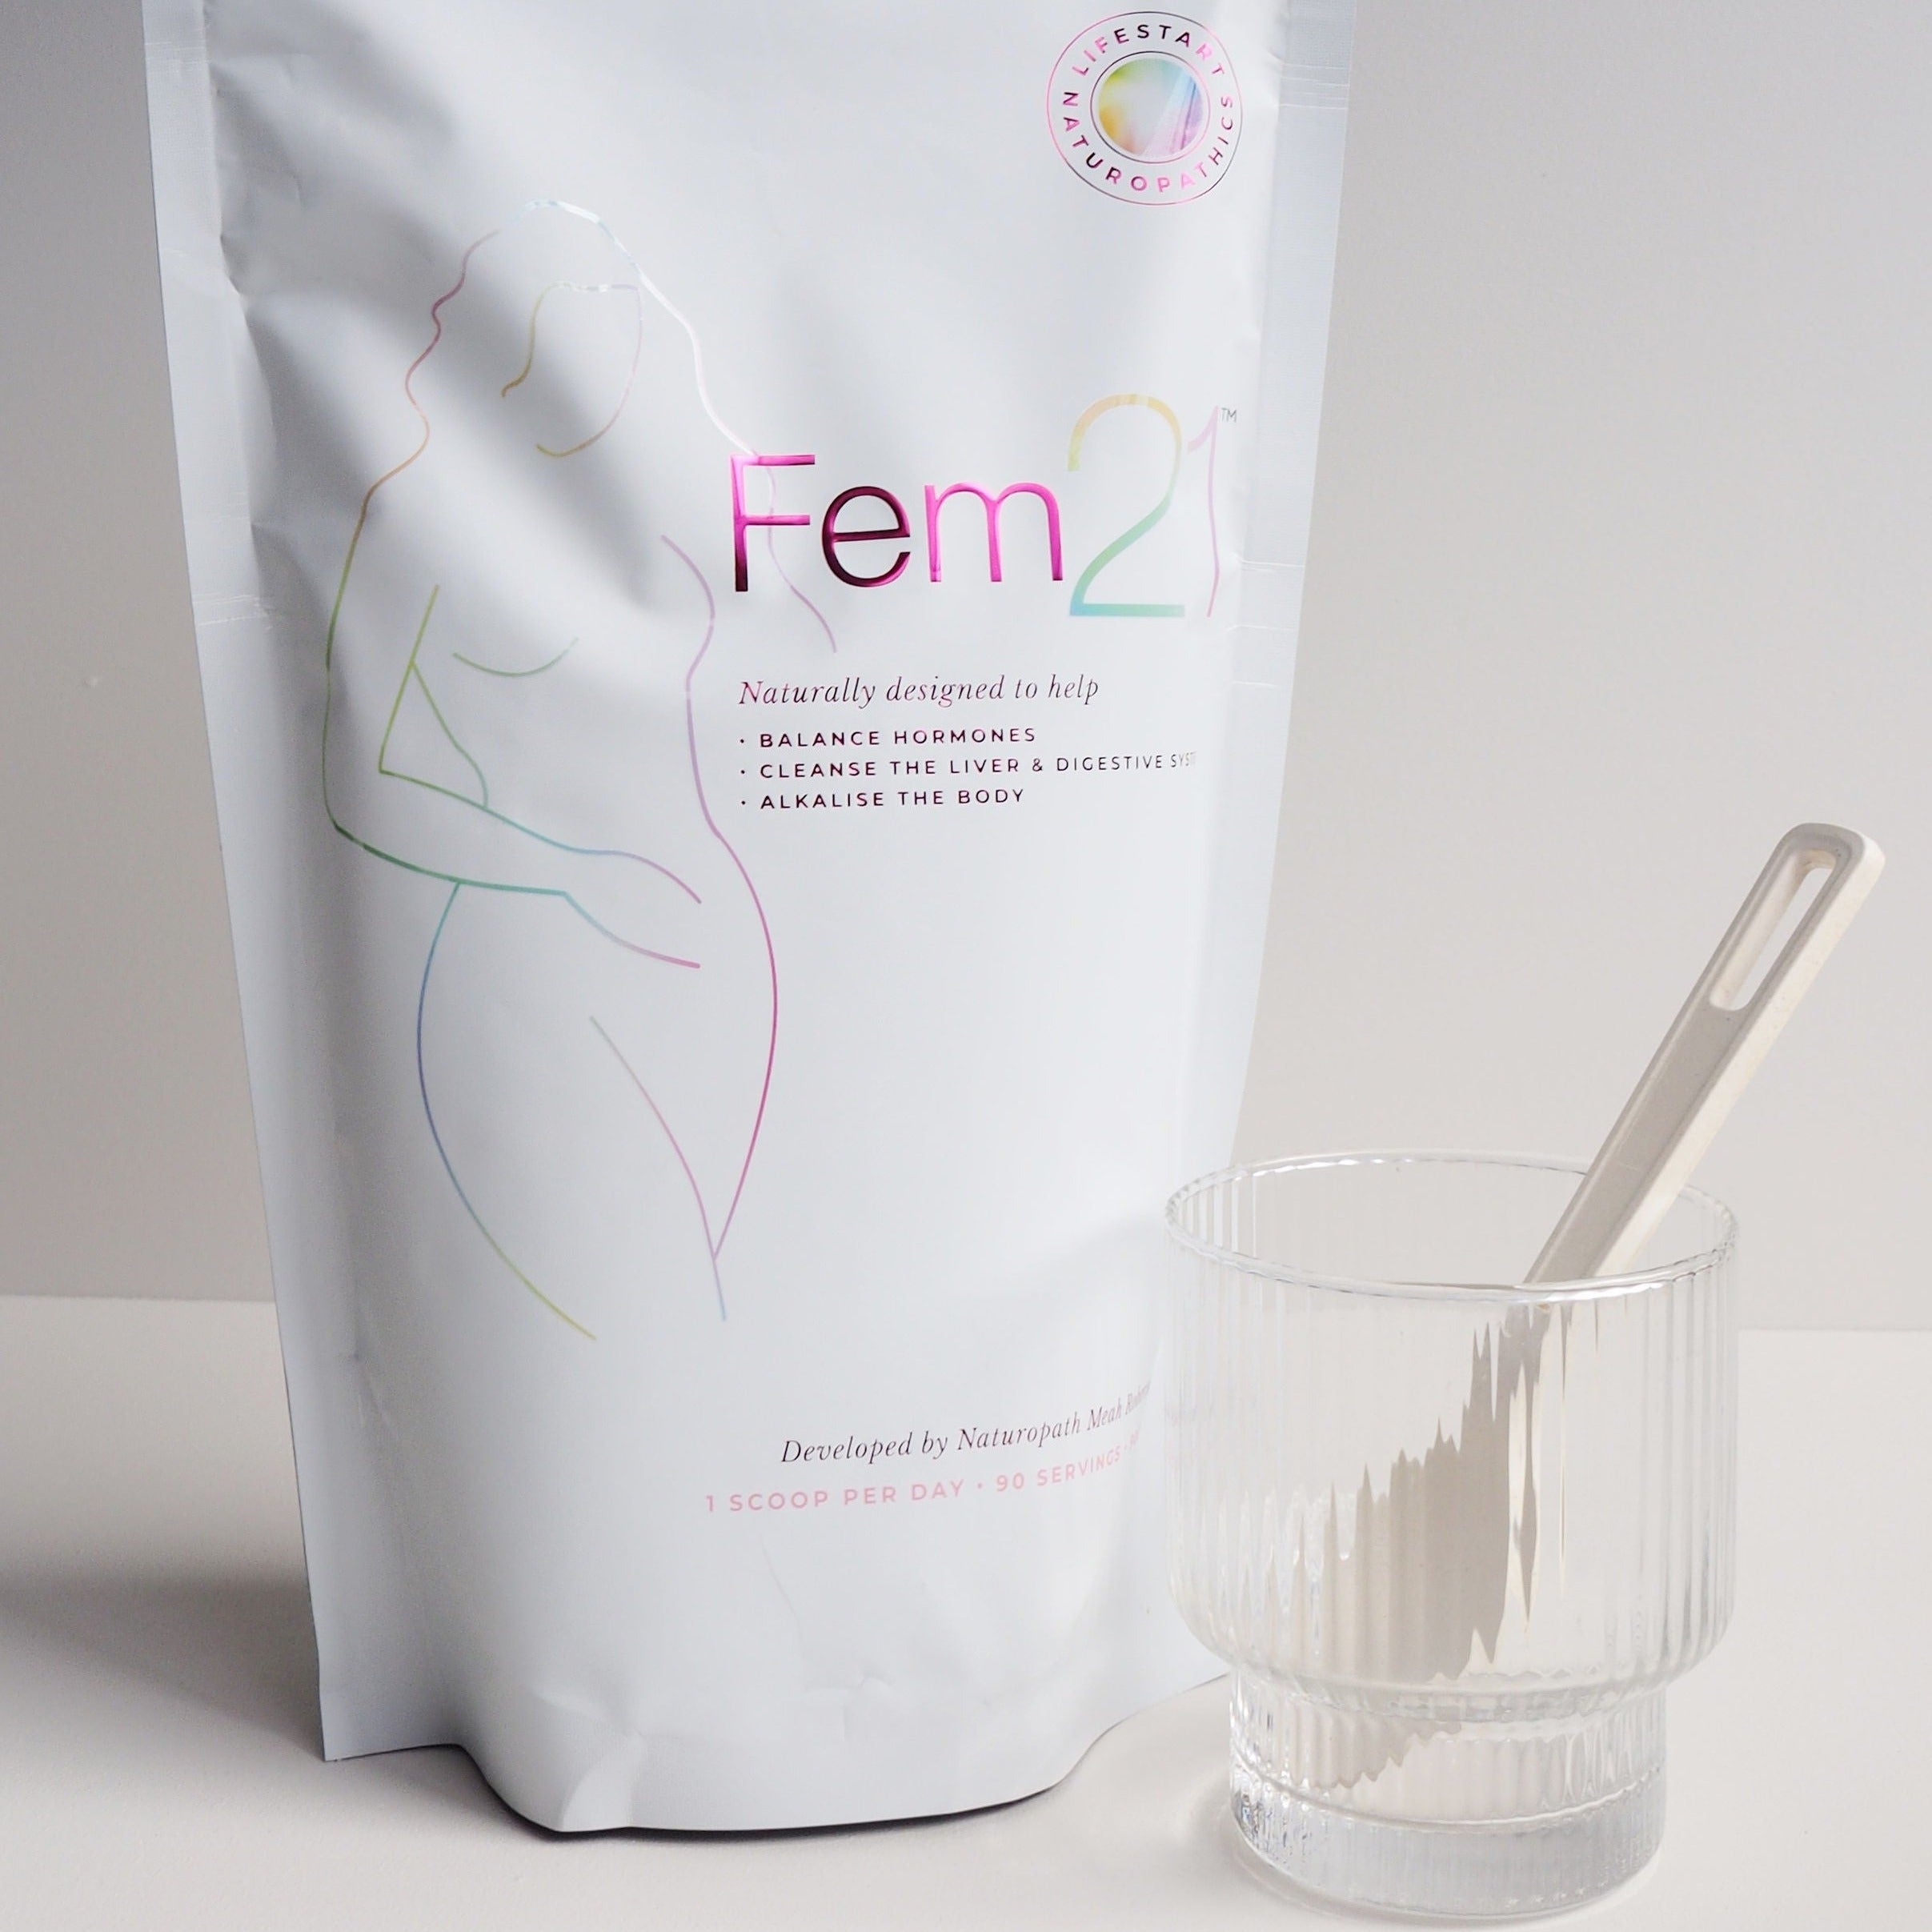 Fem21 Pouch with Scoop - 900g